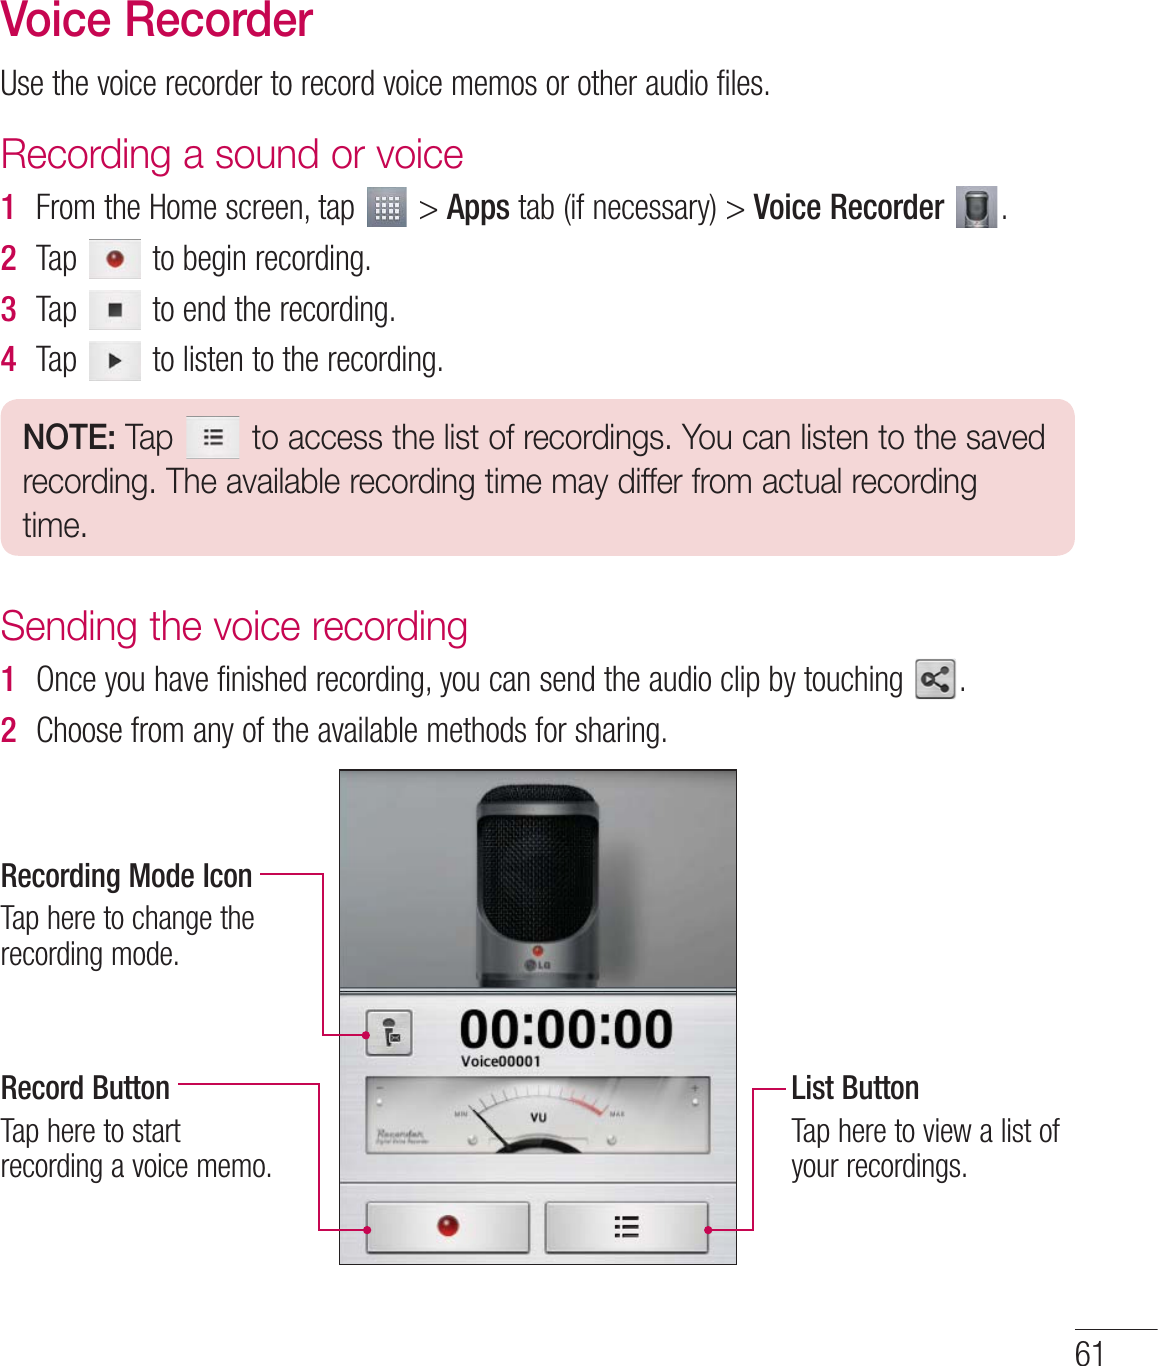 61Voice Recorder6TFUIFWPJDFSFDPSEFSUPSFDPSEWPJDFNFNPTPSPUIFSBVEJPGJMFTRecording a sound or voice1  &apos;SPNUIF)PNFTDSFFOUBQ AppsUBCJGOFDFTTBSZVoice Recorder  2  5BQ UPCFHJOSFDPSEJOH3  5BQ UPFOEUIFSFDPSEJOH4  5BQ UPMJTUFOUPUIFSFDPSEJOHNOTE: Tap   to access the list of recordings. You can listen to the saved recording. The available recording time may differ from actual recording time.Sending the voice recording1  0ODFZPVIBWFGJOJTIFESFDPSEJOHZPVDBOTFOEUIFBVEJPDMJQCZUPVDIJOH 2  $IPPTFGSPNBOZPGUIFBWBJMBCMFNFUIPETGPSTIBSJOHRecording Mode Icon5BQIFSFUPDIBOHFUIFSFDPSEJOHNPEFRecord Button5BQIFSFUPTUBSUSFDPSEJOHBWPJDFNFNPList Button5BQIFSFUPWJFXBMJTUPGZPVSSFDPSEJOHT